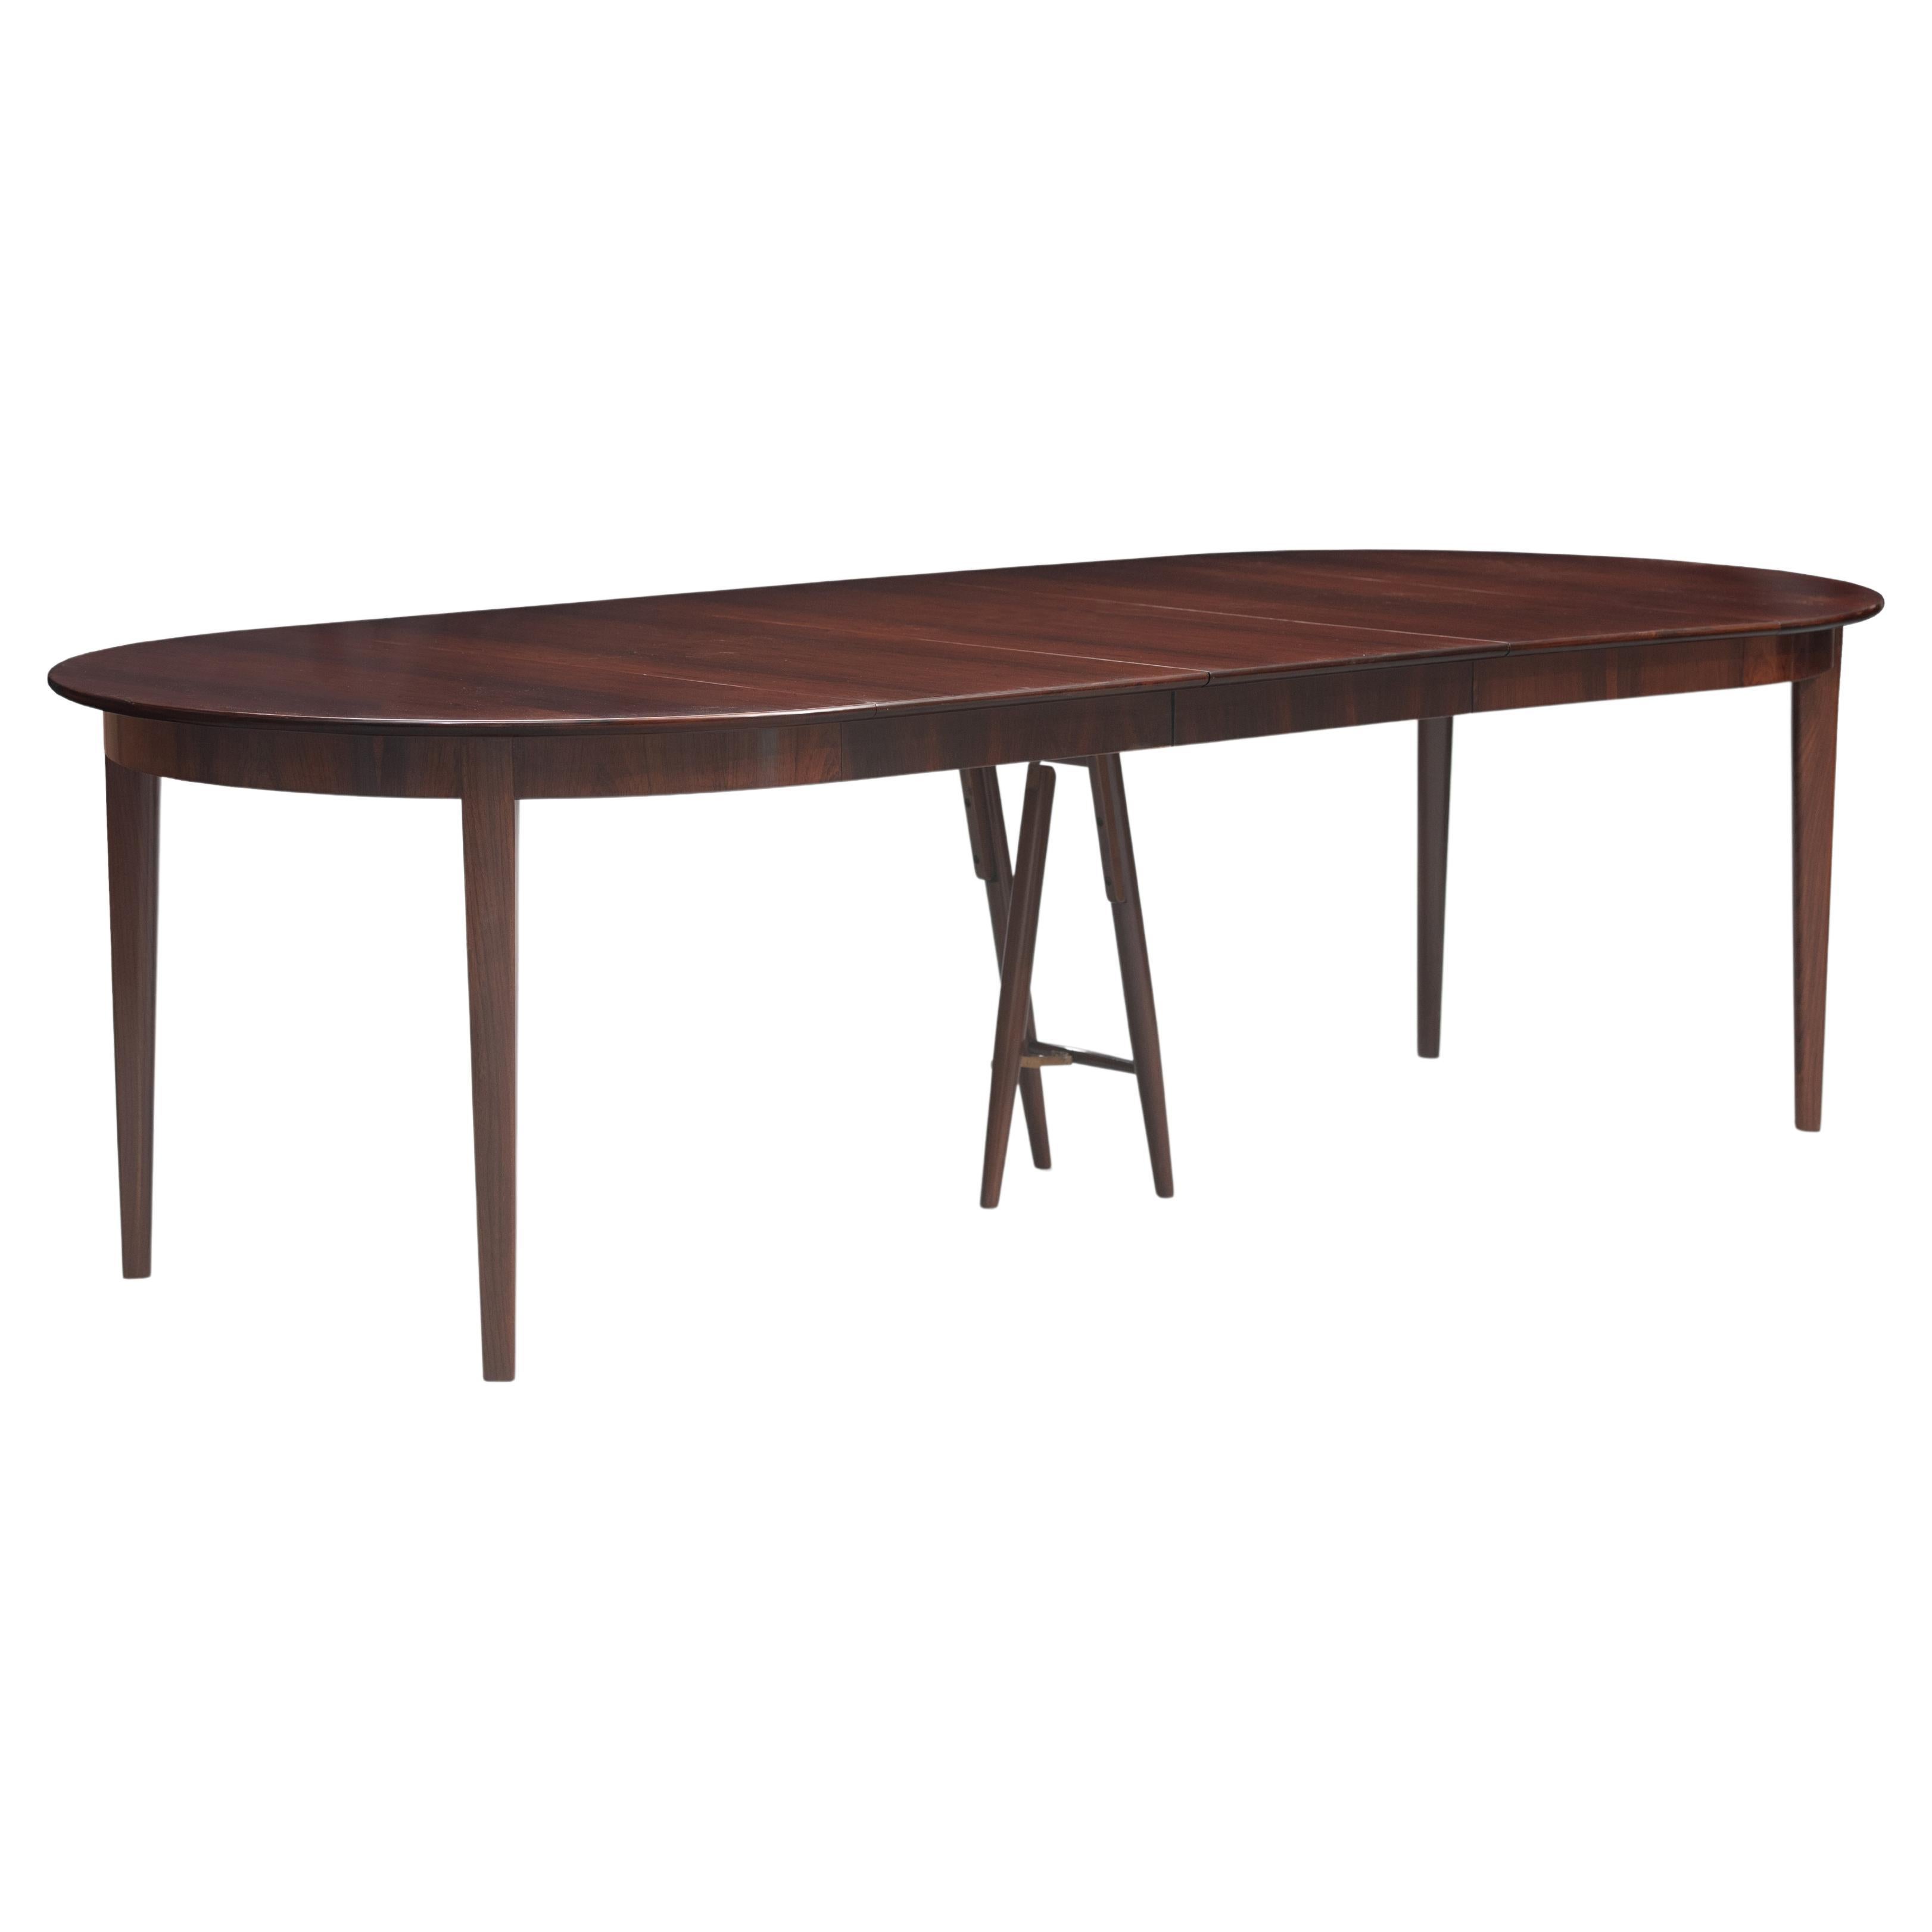 Large Rosewood Dining Table with Three Extensions Leaves